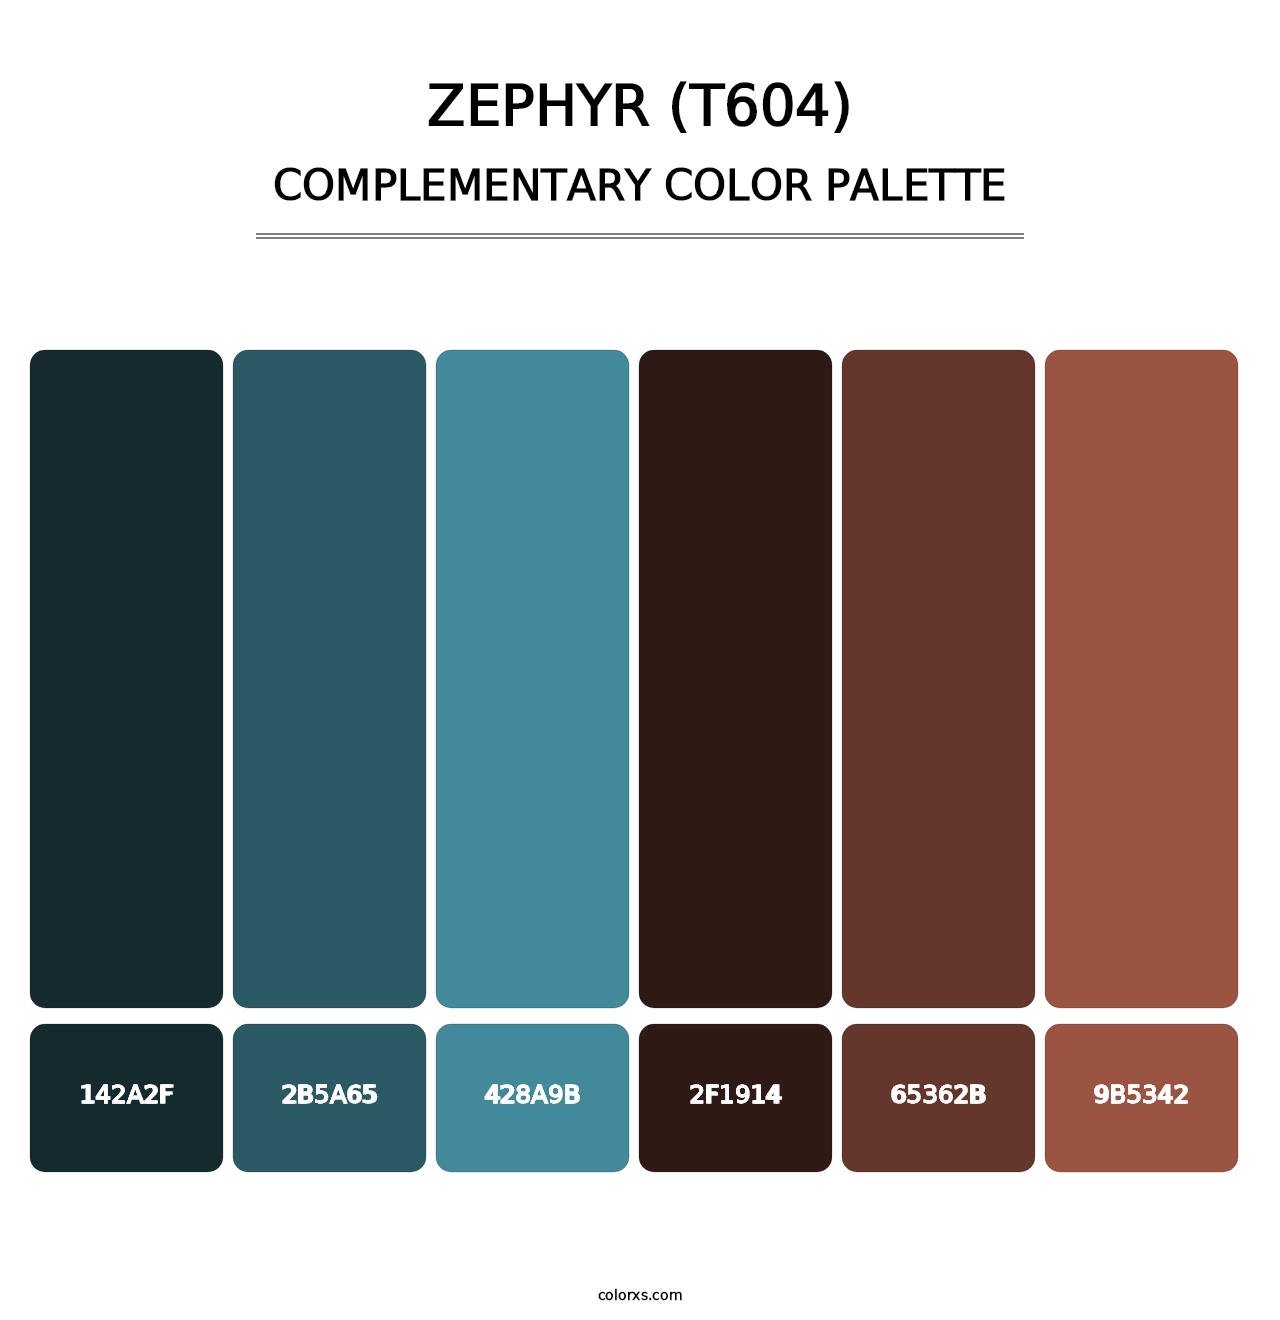 Zephyr (T604) - Complementary Color Palette